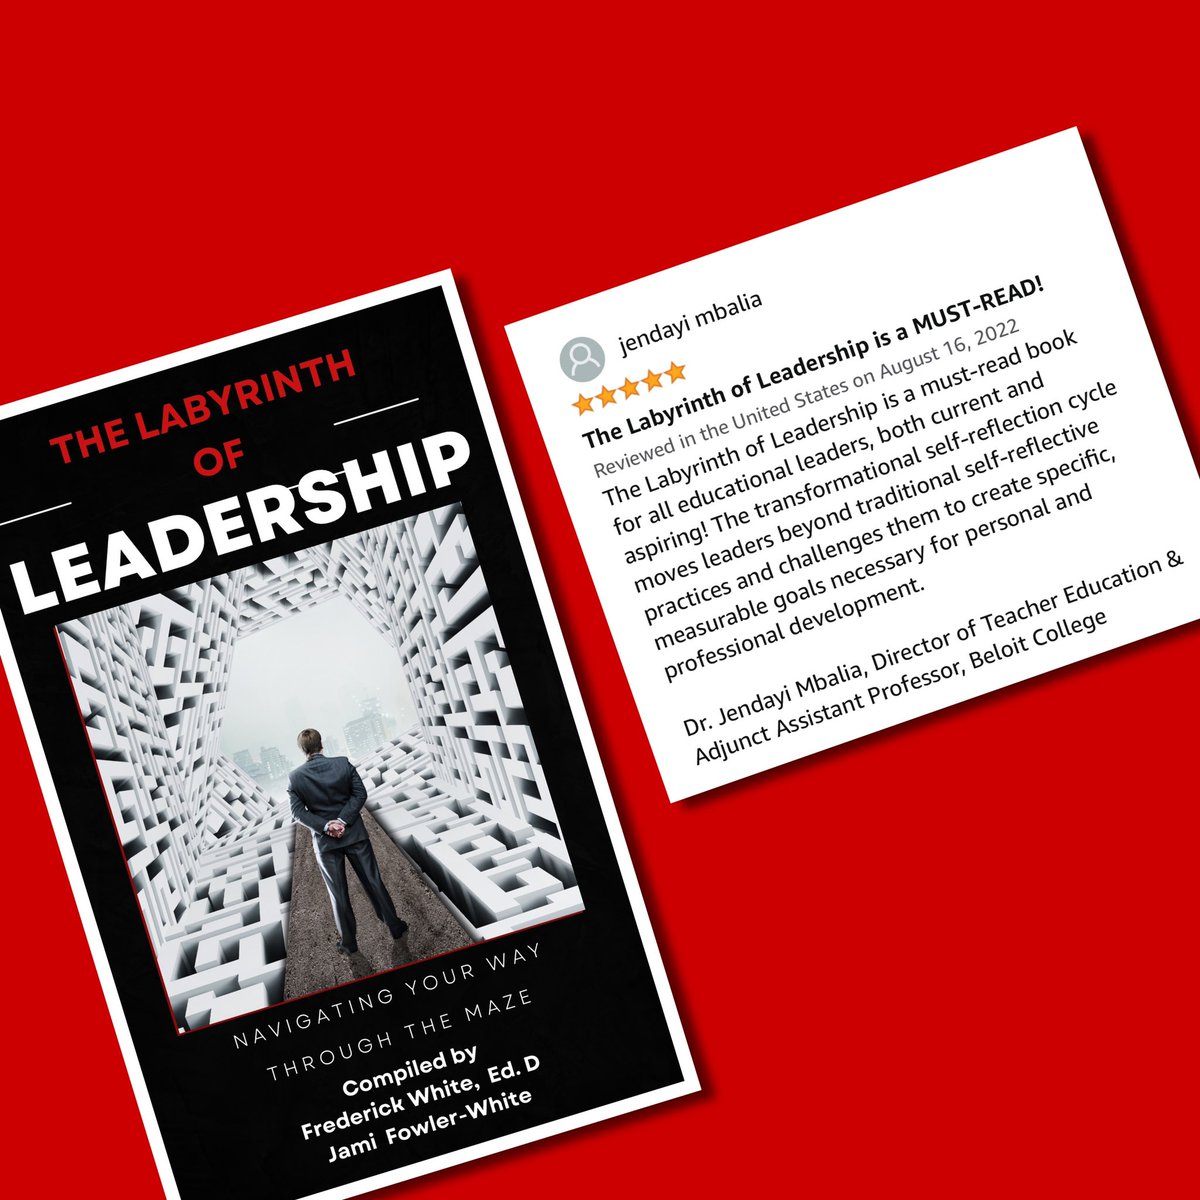 The Labyrinth of Leadership: What strategies are you using to manage the “rollercoaster effects” of leadership? @PlayYay eloquently tackles these feelings in amzn.to/3QKI3Dg. #BWEL member Jendayi Mbalia raves that it is a MUST READ!!